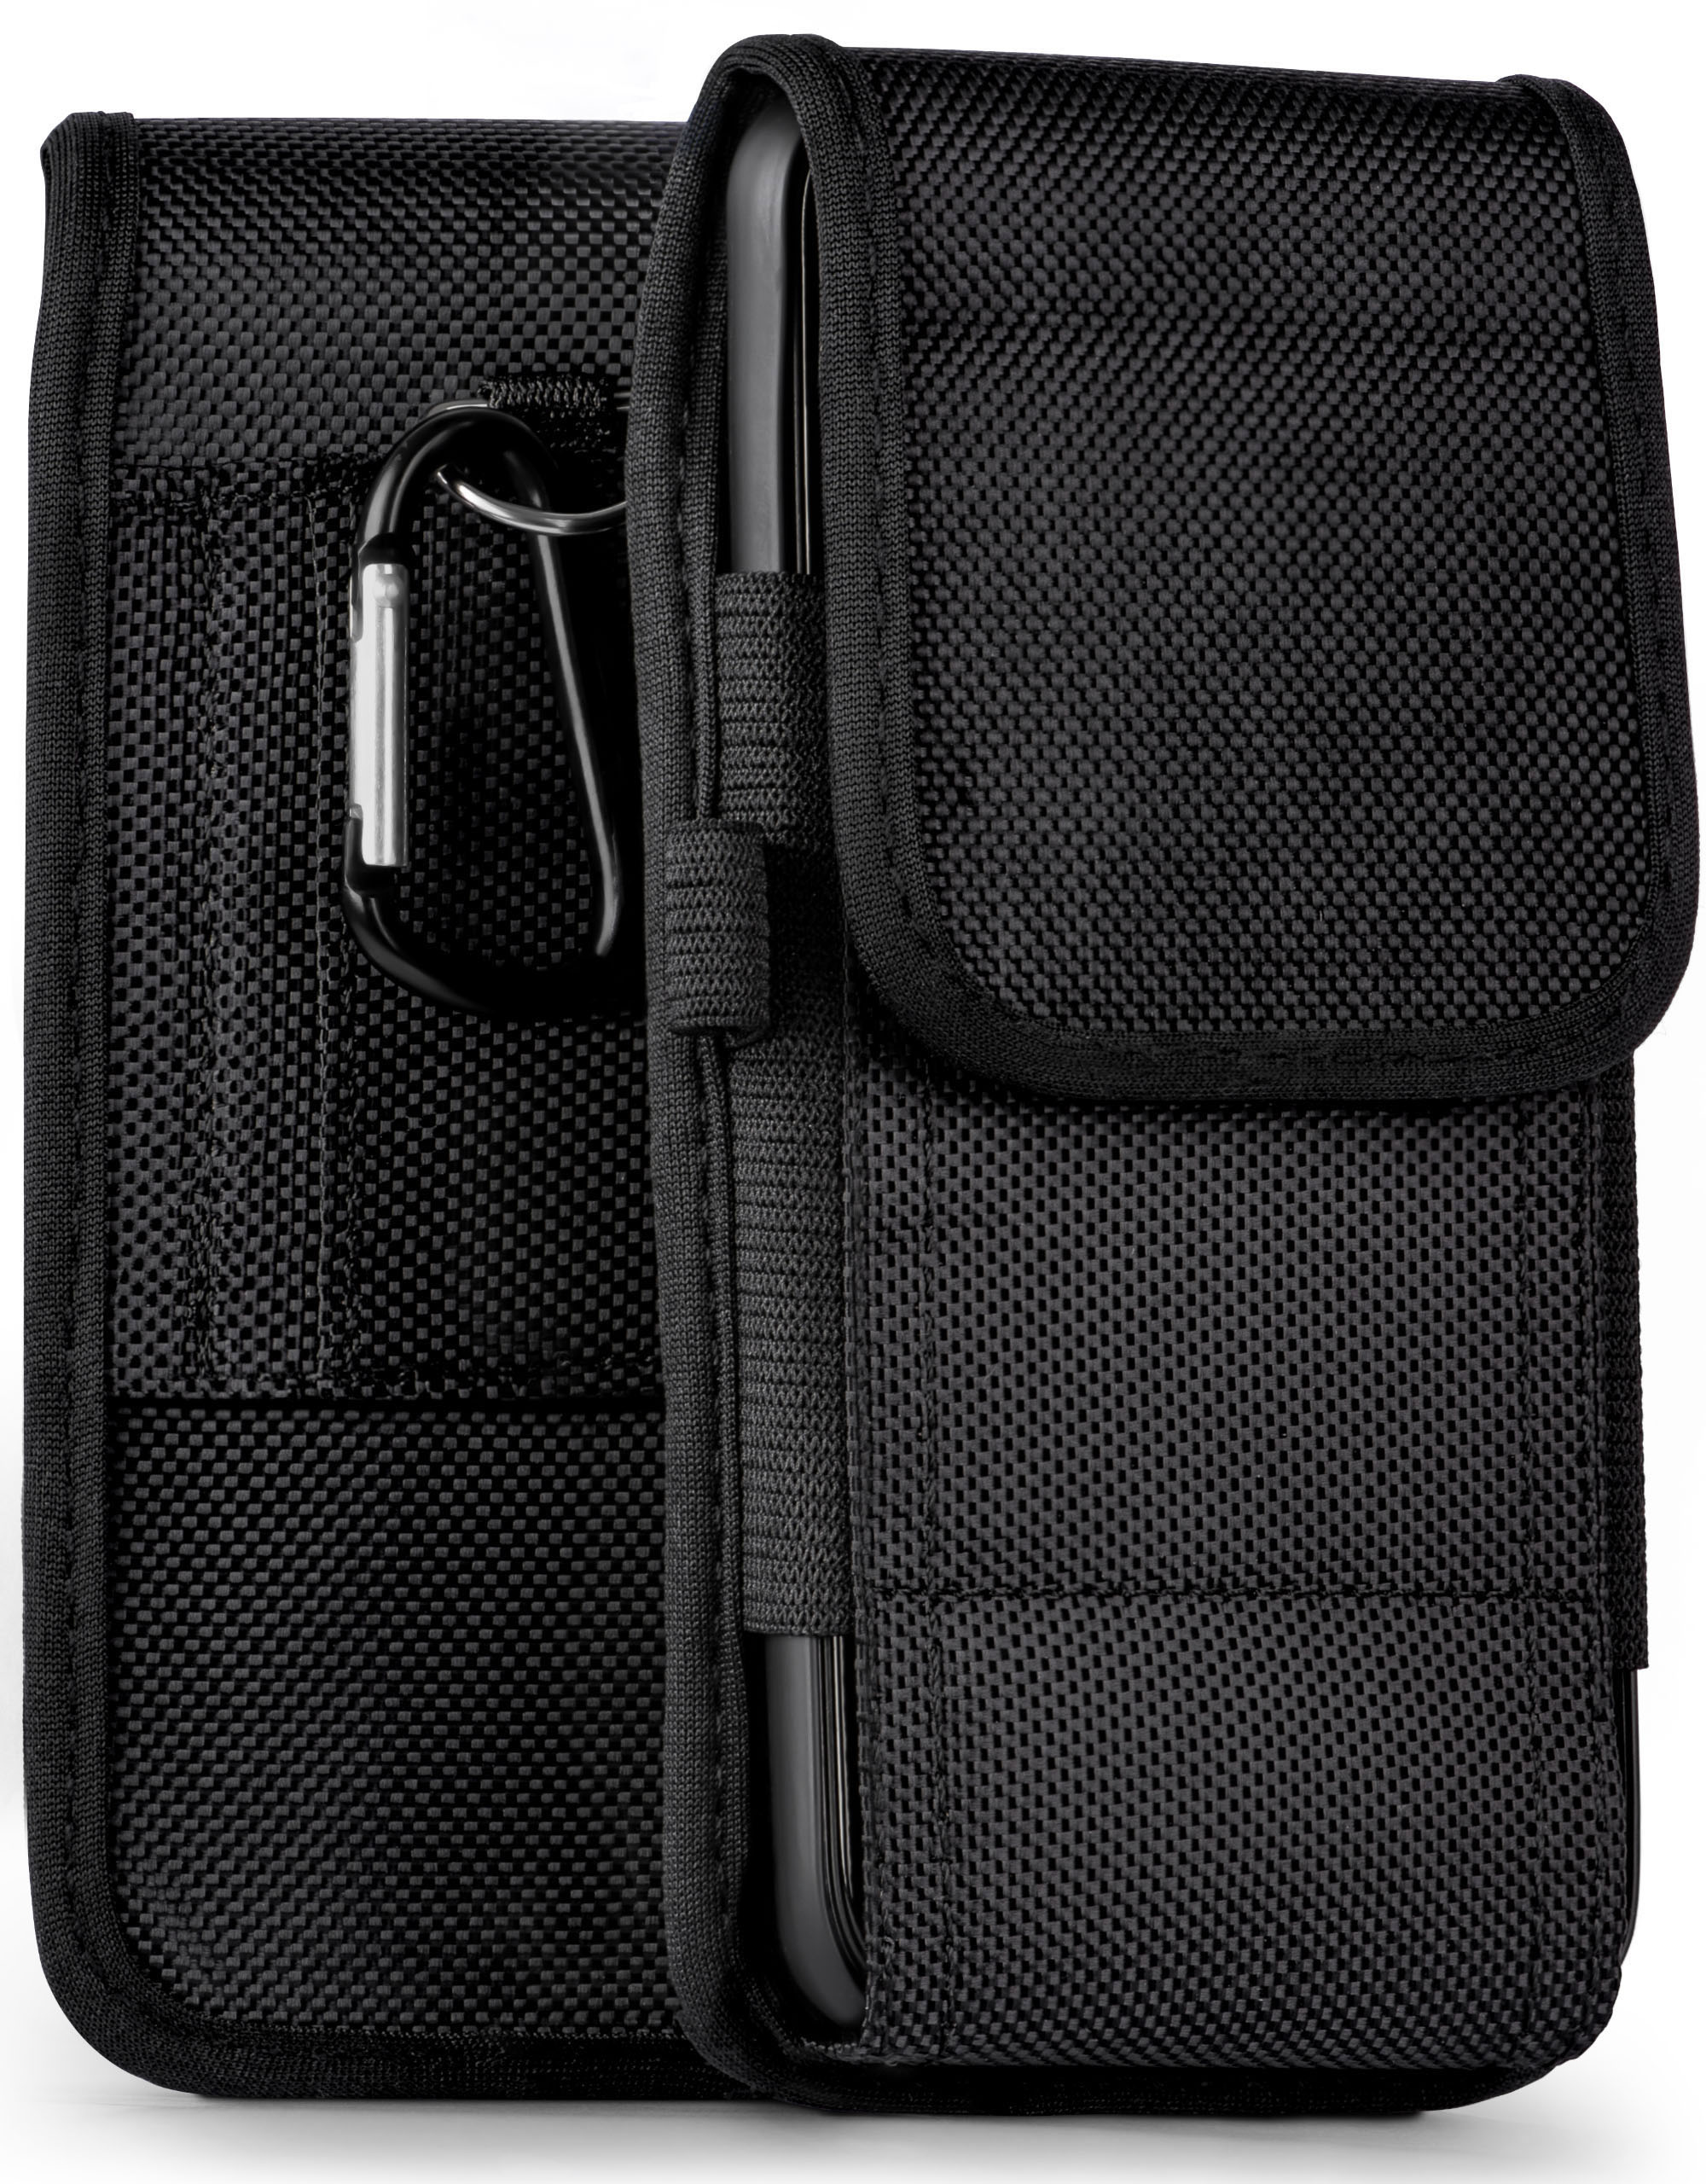 Blade V2020, Agility Case, ZTE, MOEX Holster, Trail